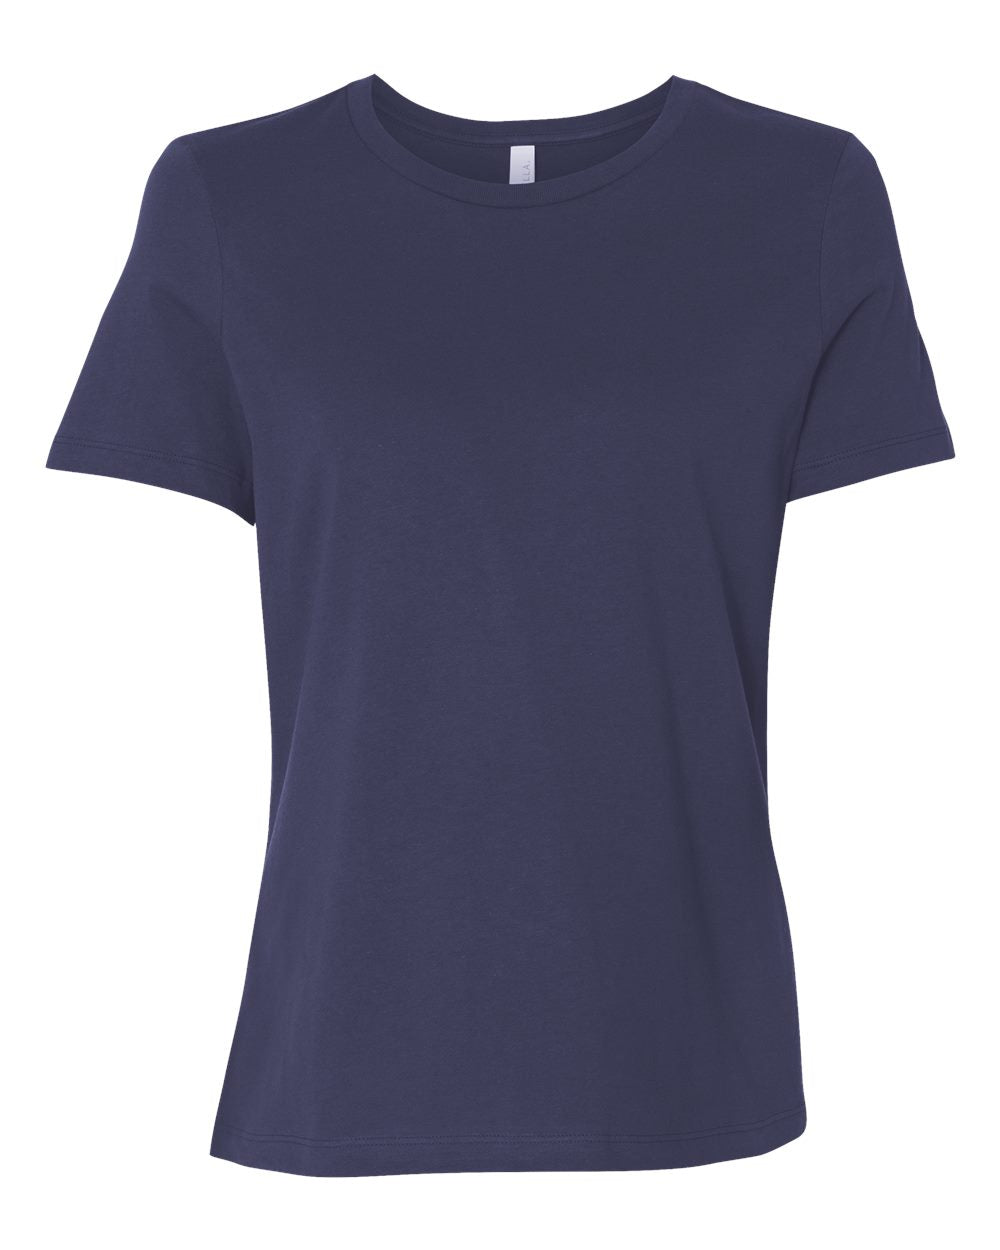 bella+canvas womens relaxed tee navy